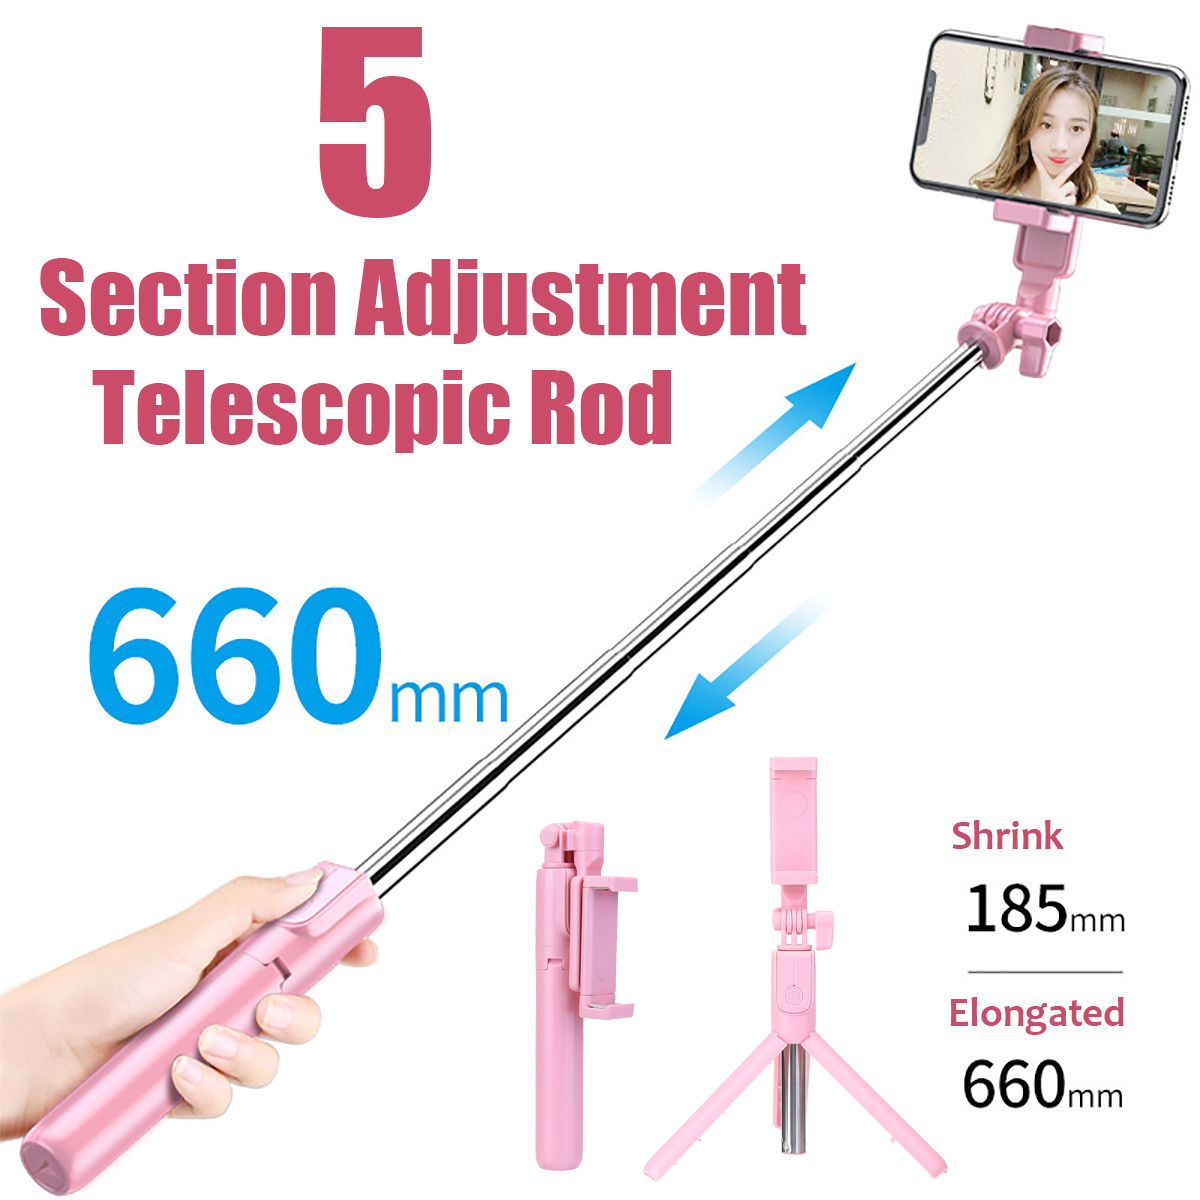 Telescopic-Fill-Light-Multifunctional-bluetooth-Selfie-Stick-Tripod-Outdoor-Mobile-Phone-Photography-1760893-3